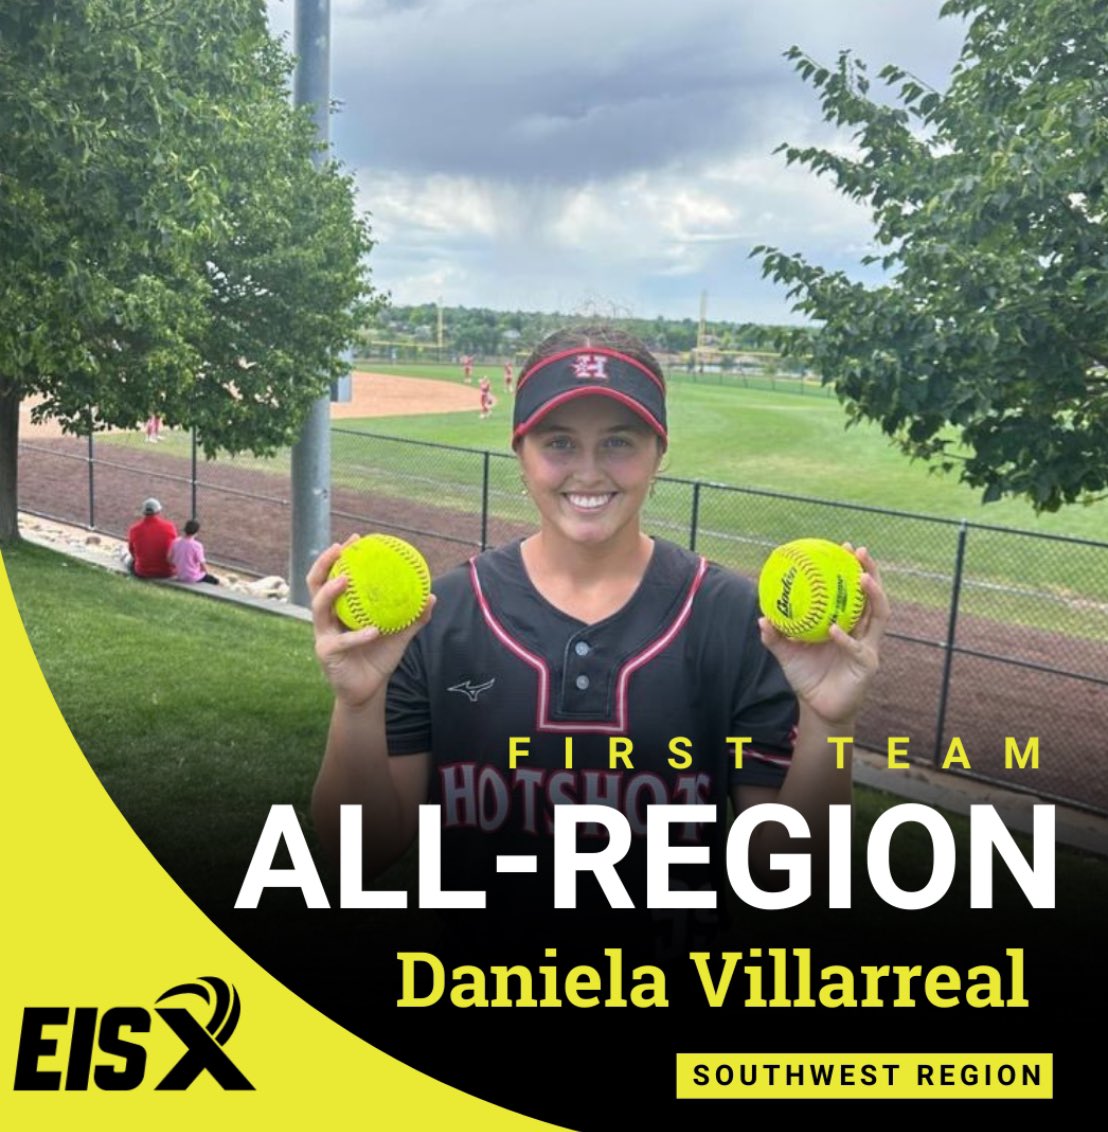 Thank you @ExtraInningSB for recognizing me as First-Team All Region southwest infielder in the class of 2027!! Very grateful to be listed alongside some great athletes! @hotshots_09 @DukeCoachYoung @JessicaAllister @katedrohan @rittmanjohn @NDcoachGumpf @btholl